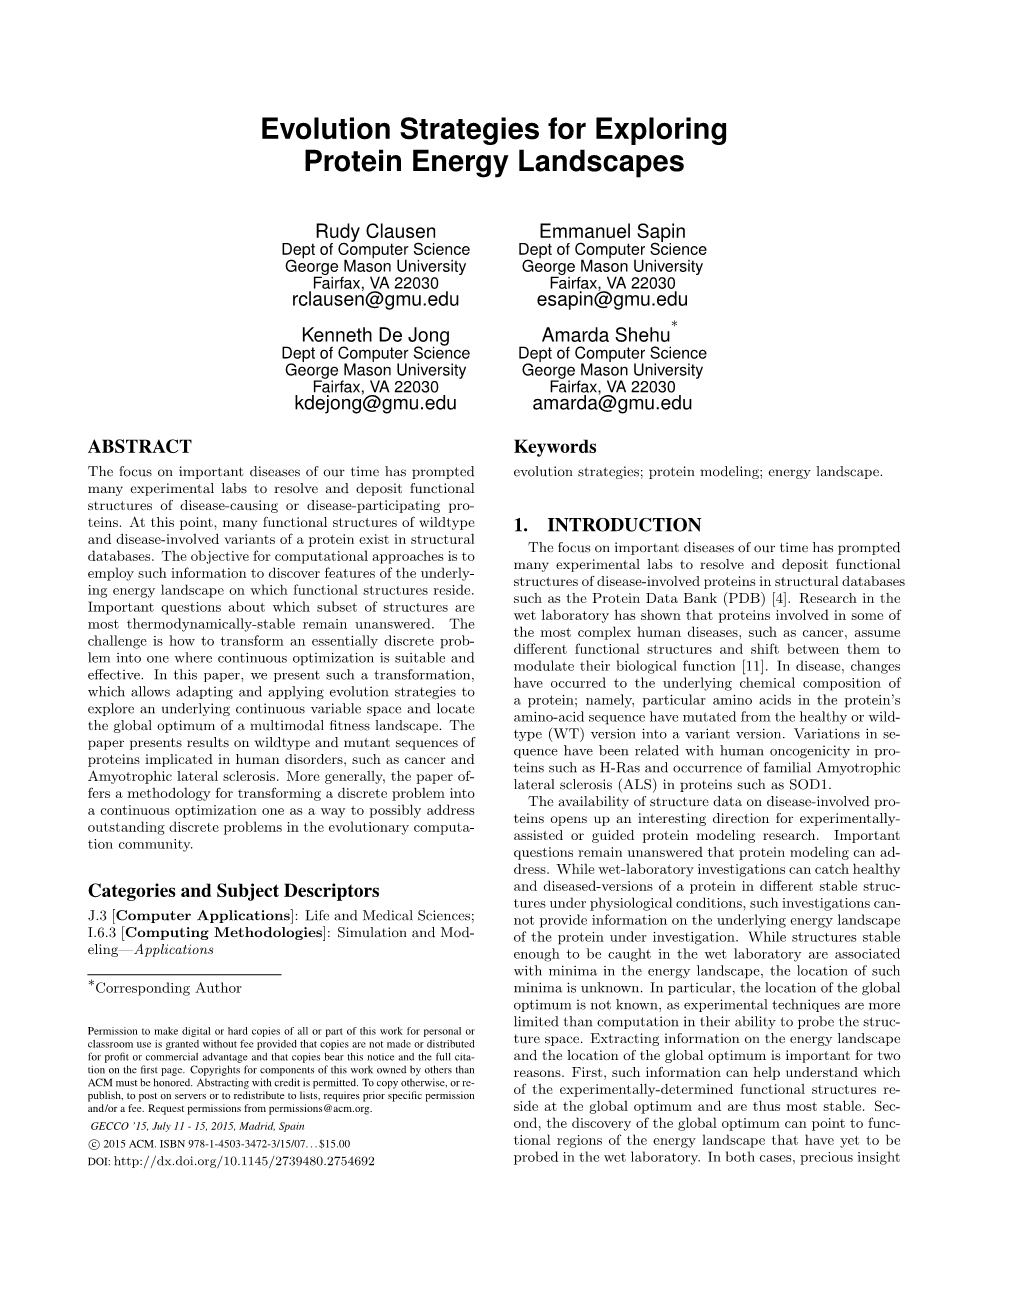 Evolution Strategies for Exploring Protein Energy Landscapes